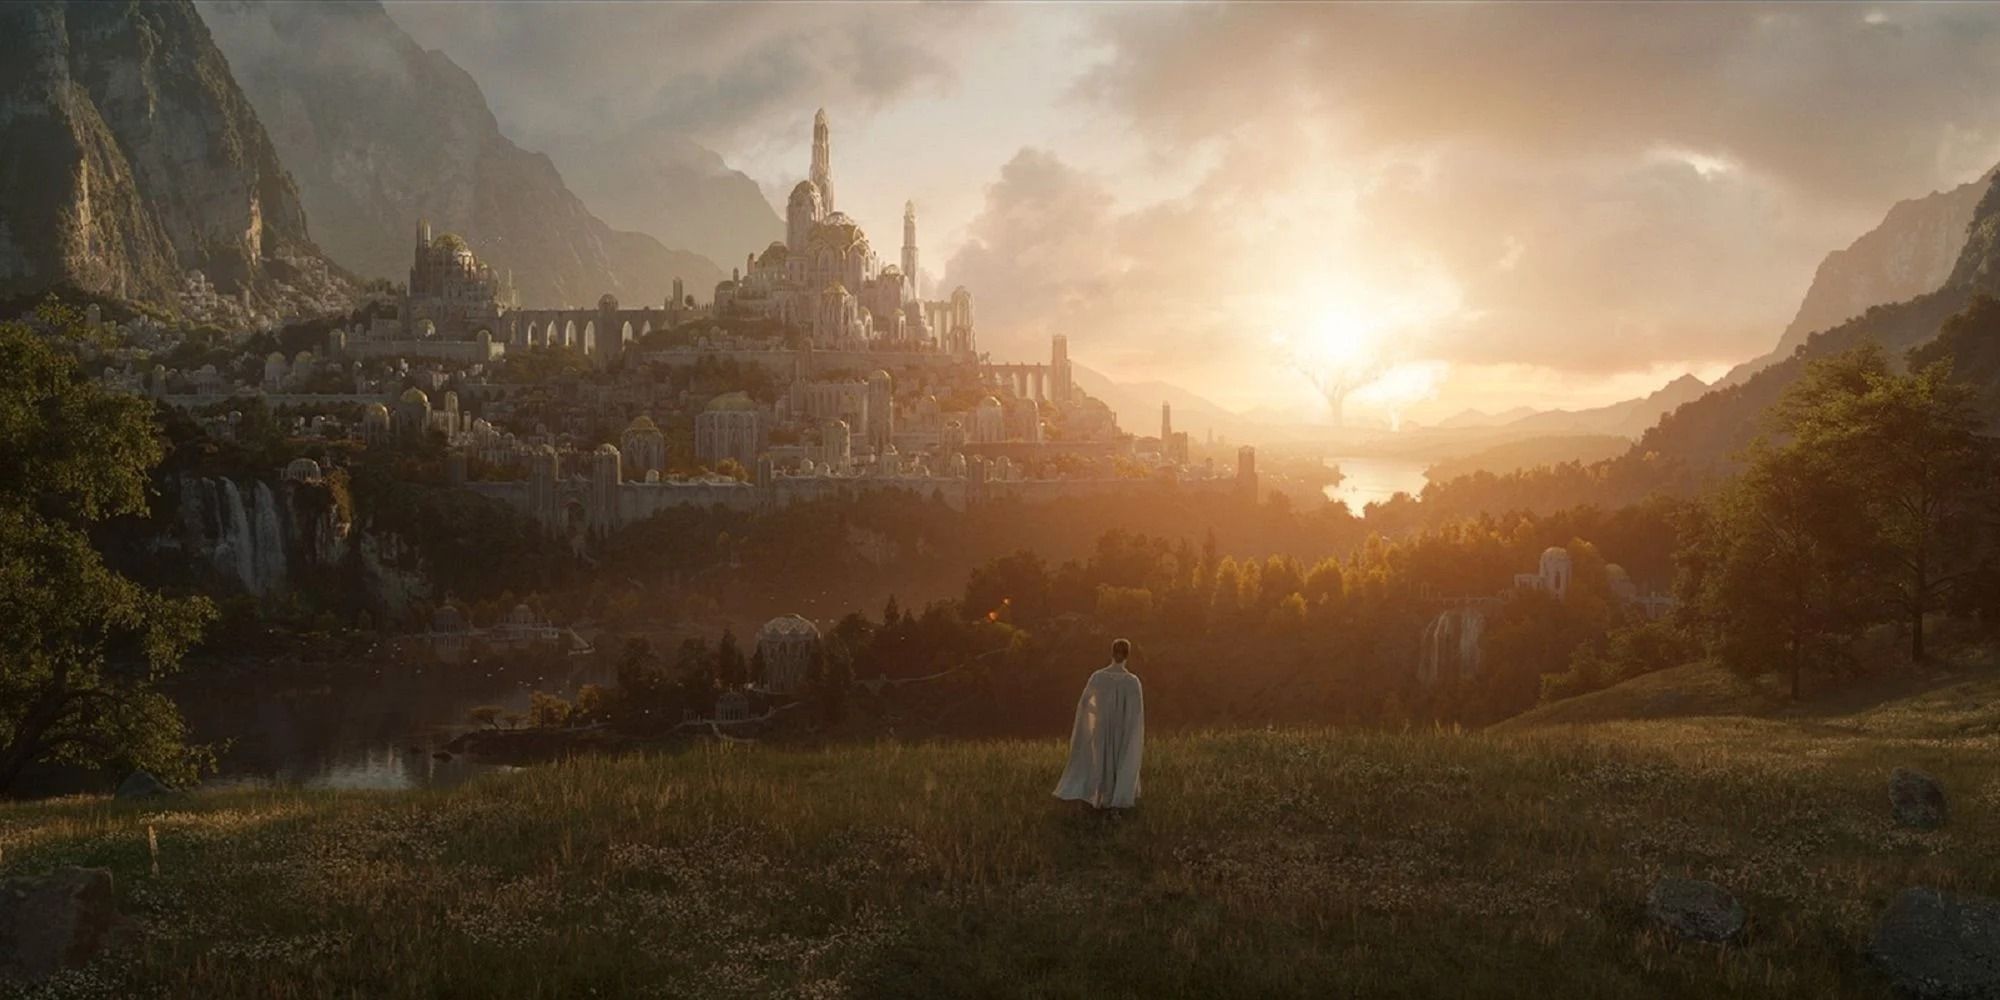 The Rings Of Power's Showrunners Didn’t Want To Make “A Documentary Of Middle-earth” 3